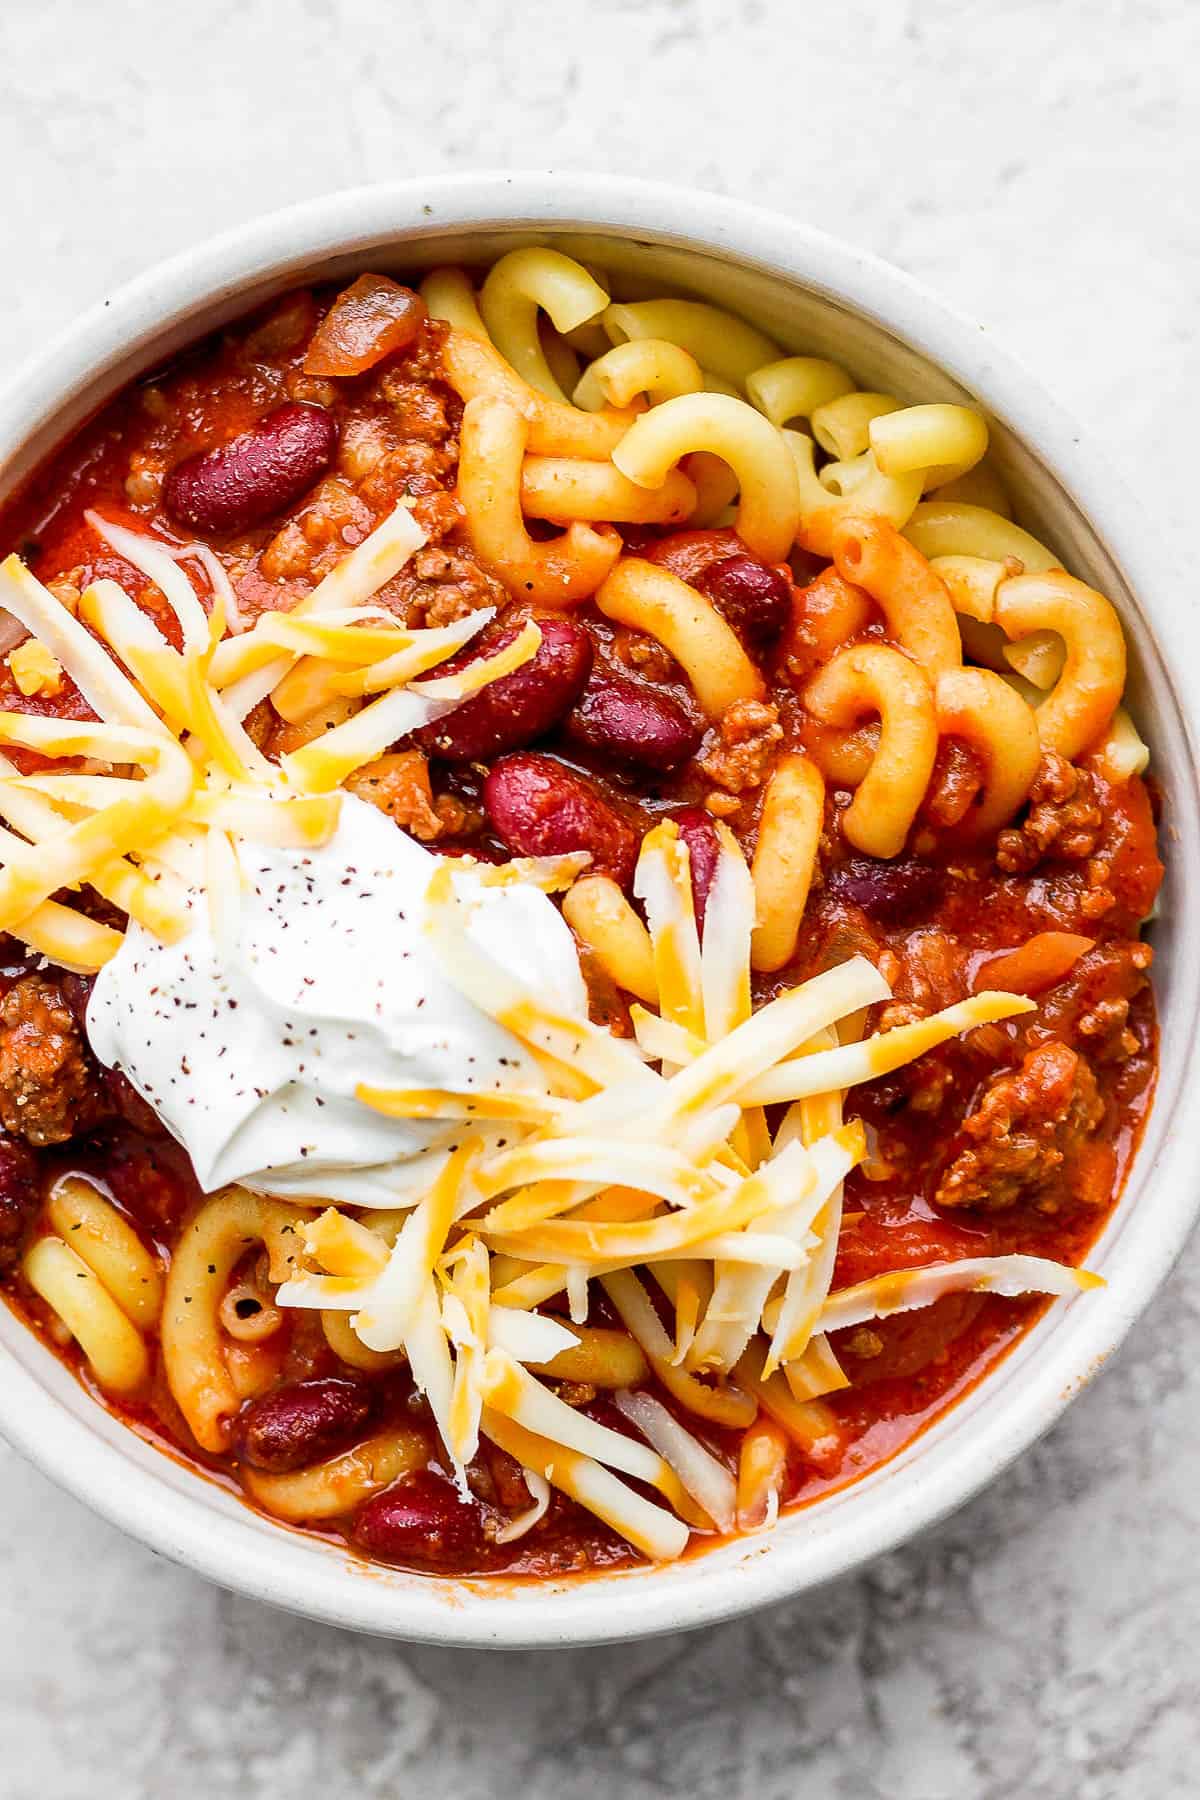 sour cream, shredded cheese, and pepper topped on a bowl of goulash and noodles.